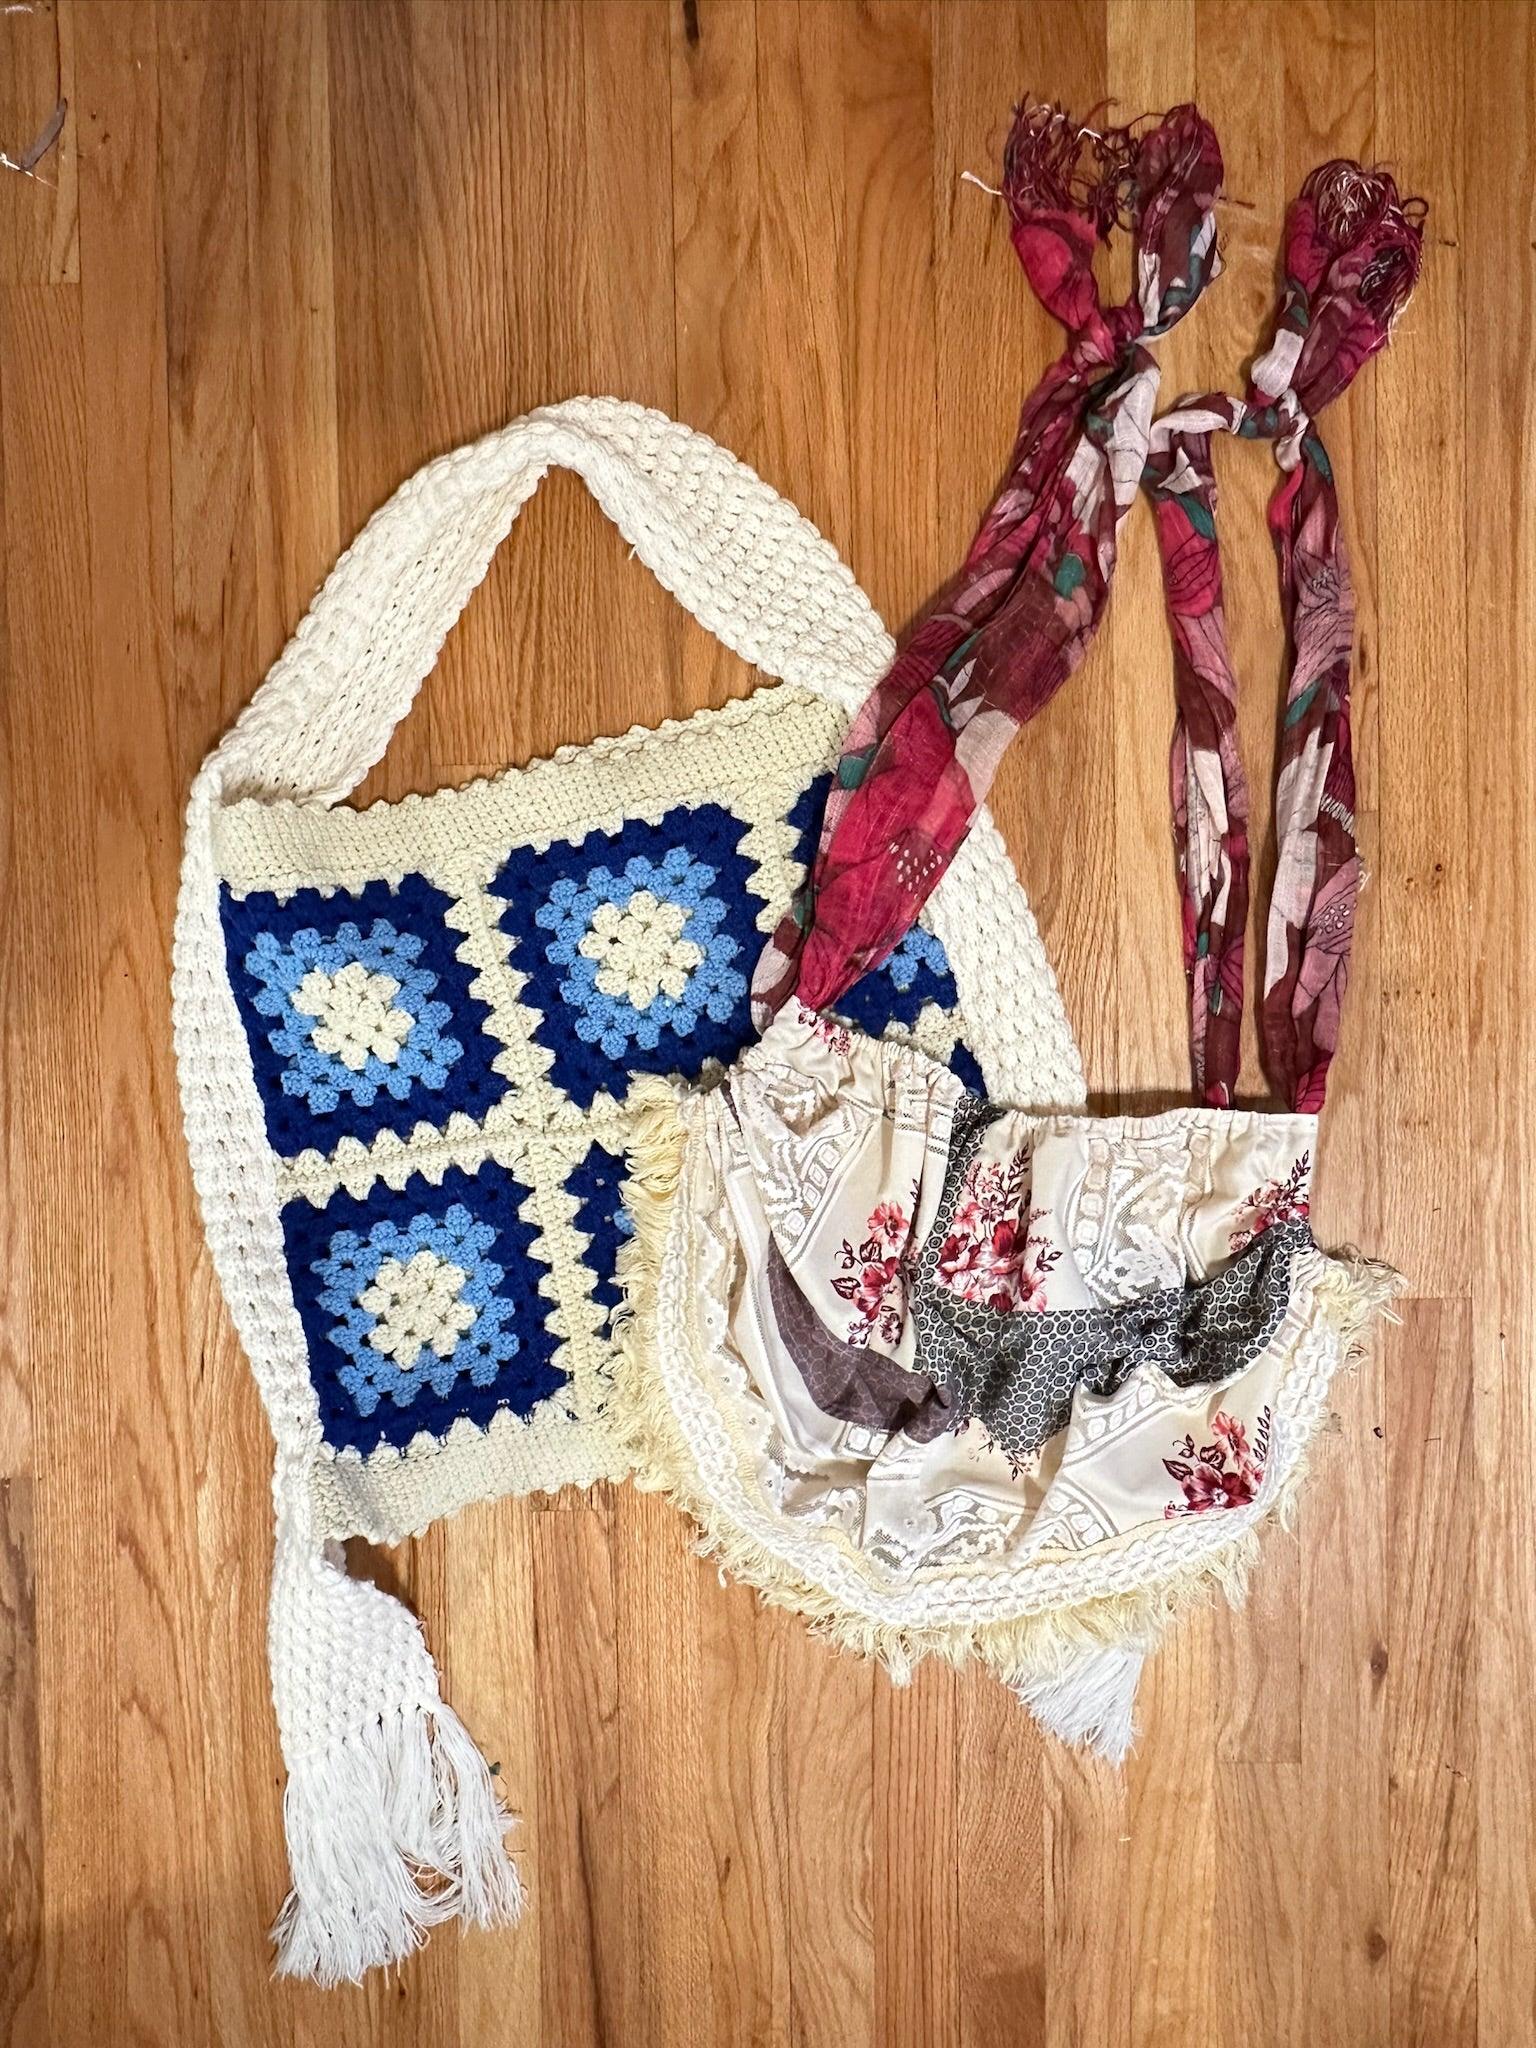 Reclaimed Come Together Circle Bag - Hippie Hued